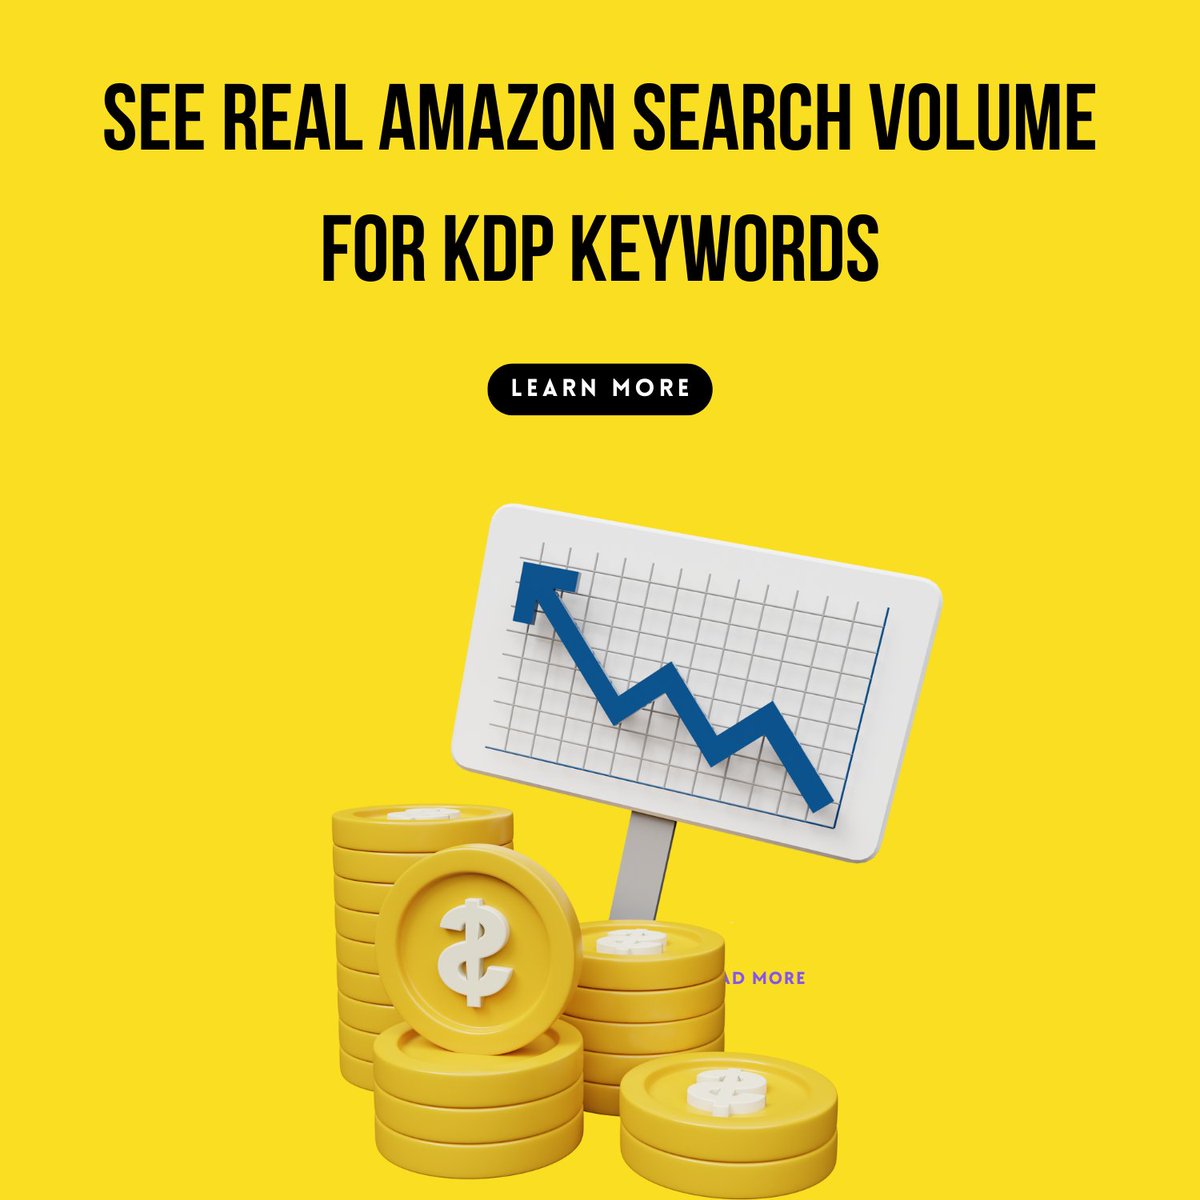 bookbolt.io/1596.html See Real Amazon Search Volume For KDP Keywords! #book #bookinteriors #covers #design #kdpbook #bookbold #bookcovers #lowcontentbooks #lowcontentniches #listkdpbooks #Amazon #amazonsearchvolume #kdpkeywords #designer #uiux #designthinking #sale